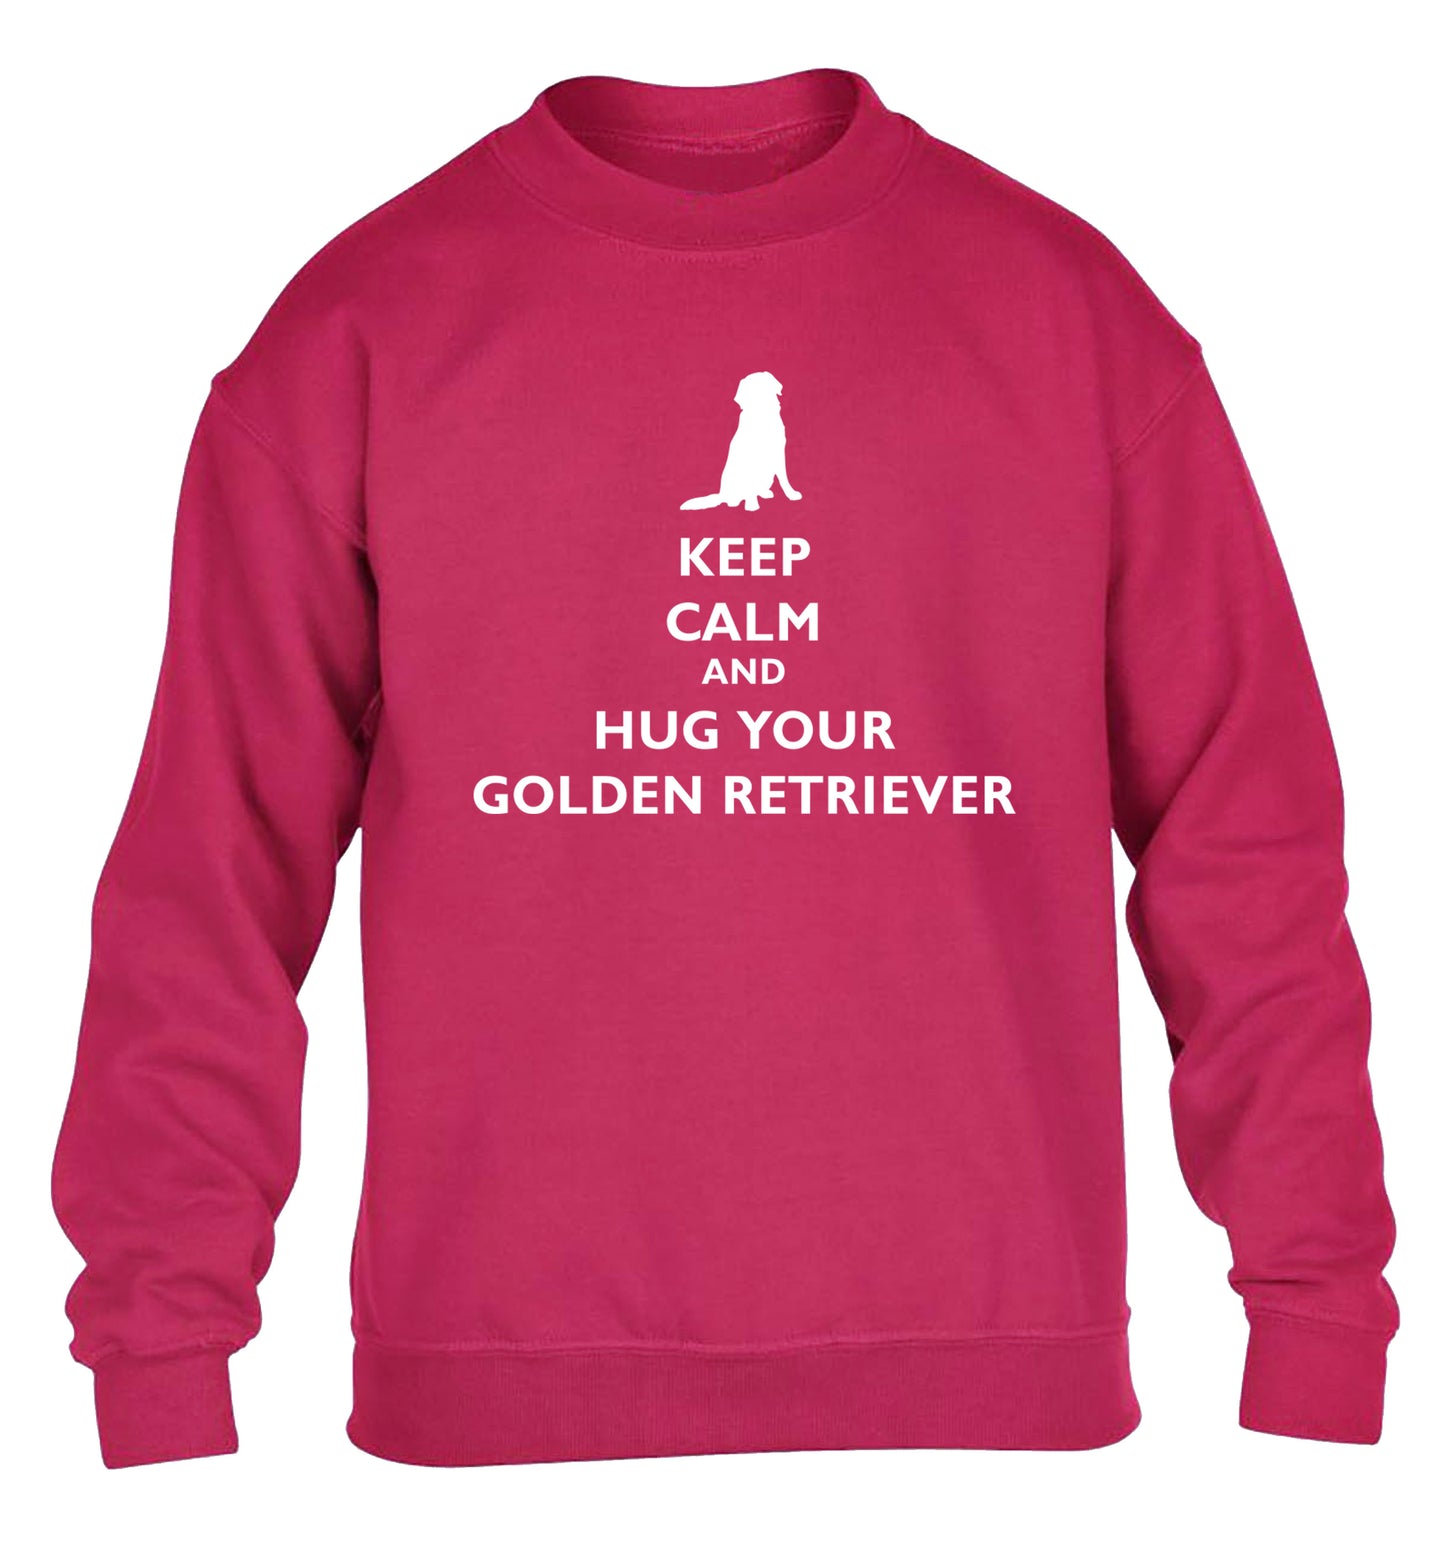 Keep calm and hug your golden retriever children's pink sweater 12-13 Years